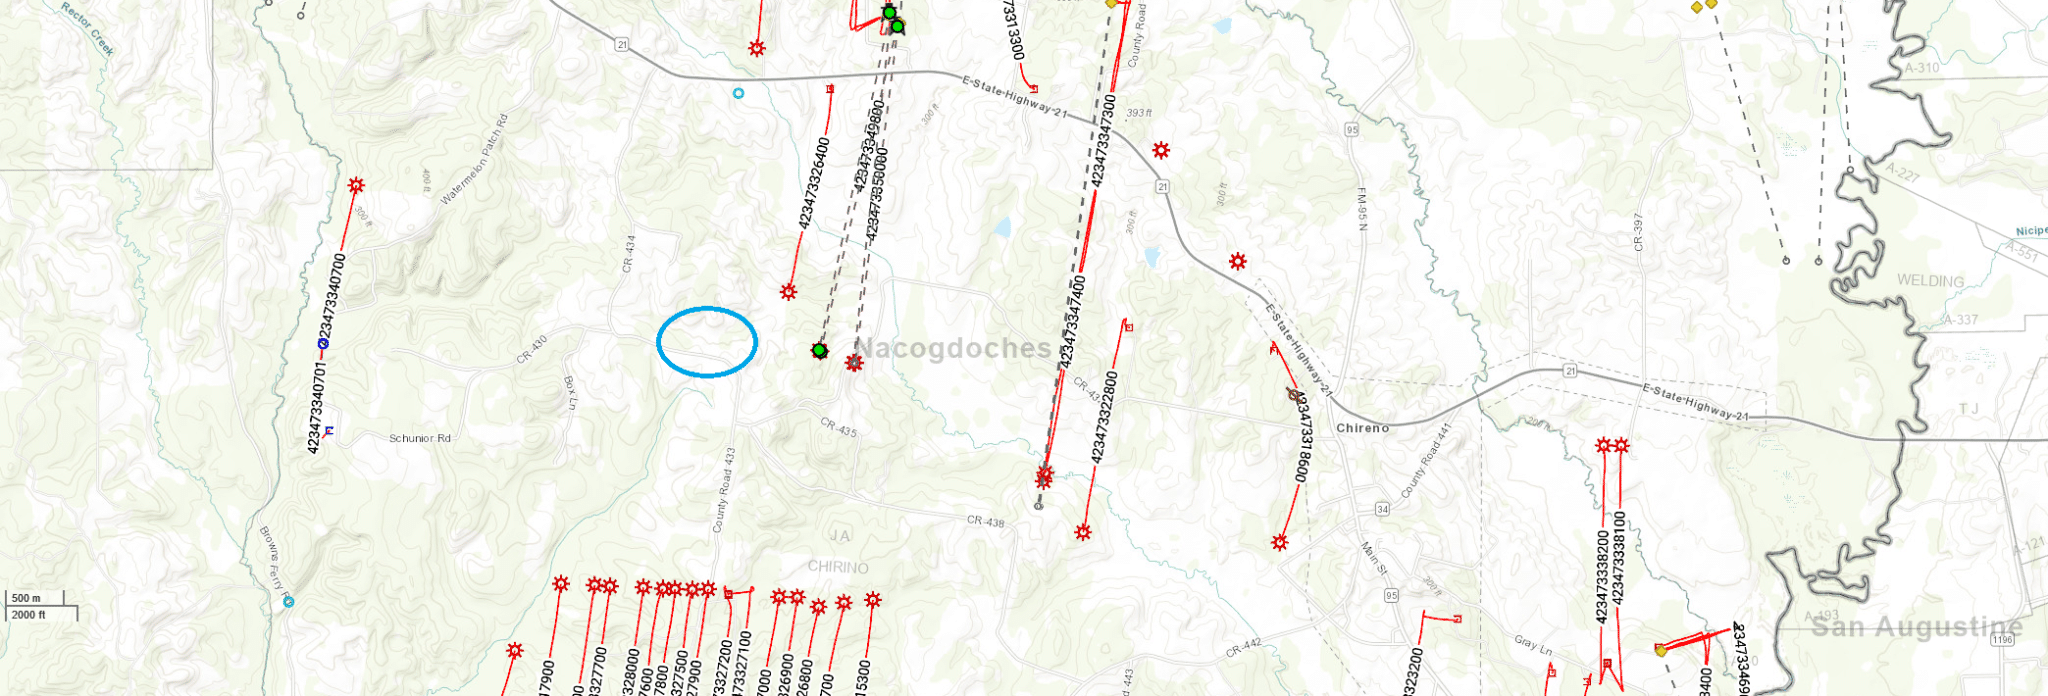 DI Map - Ownership Location